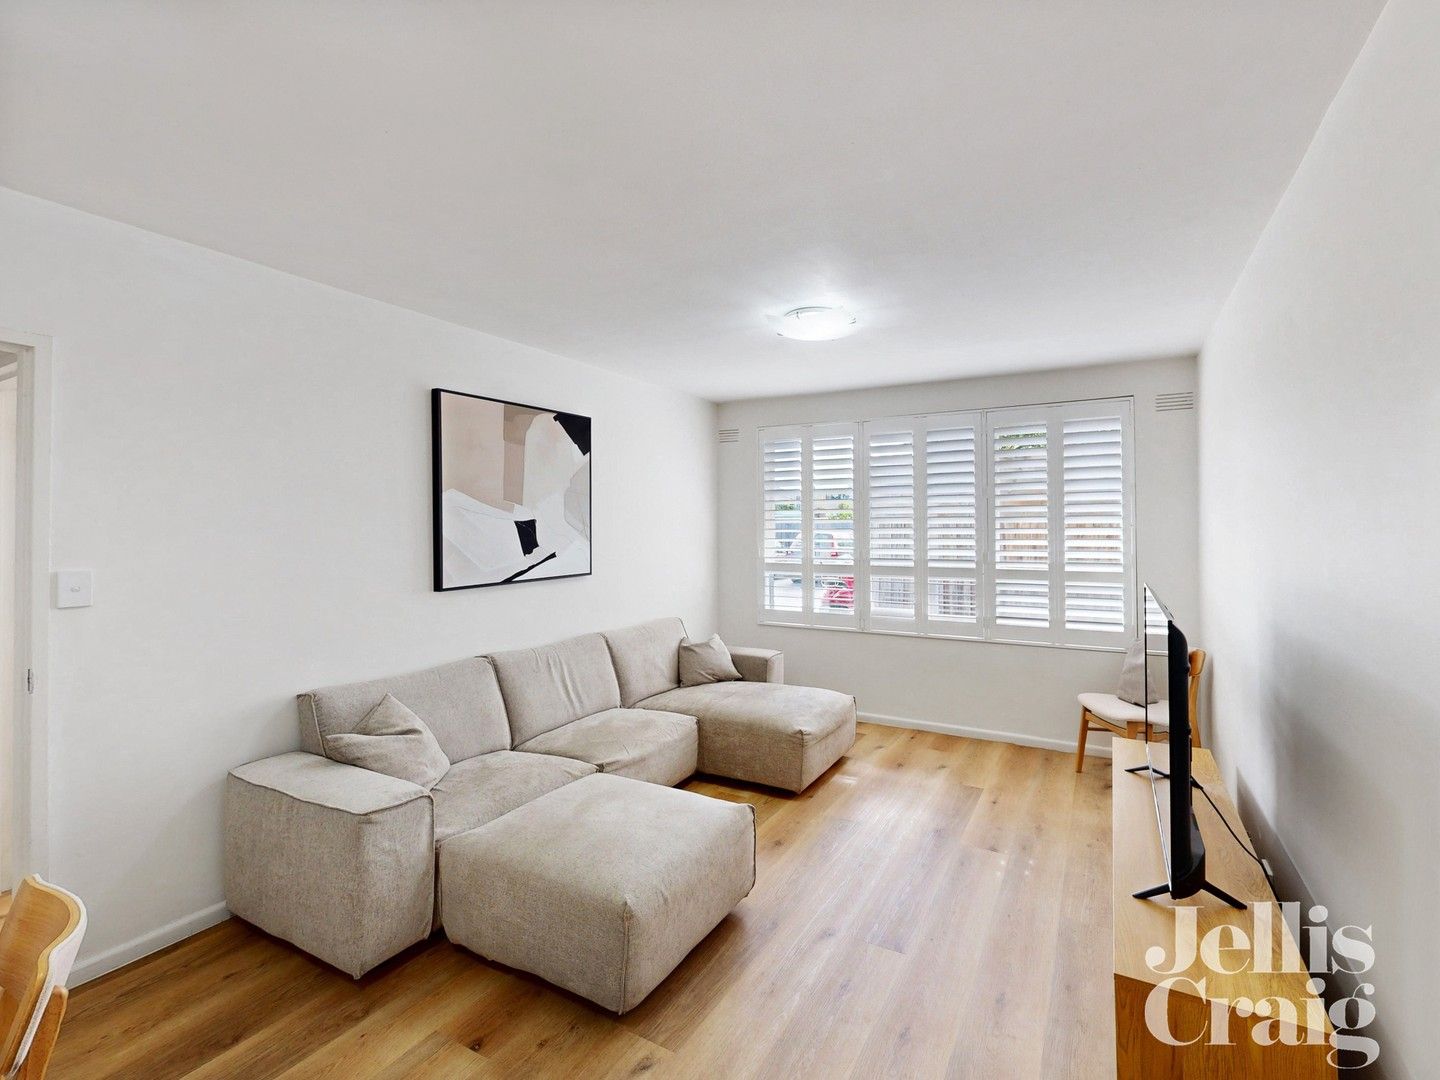 2 bedrooms Apartment / Unit / Flat in 4/27 Newry Street WINDSOR VIC, 3181